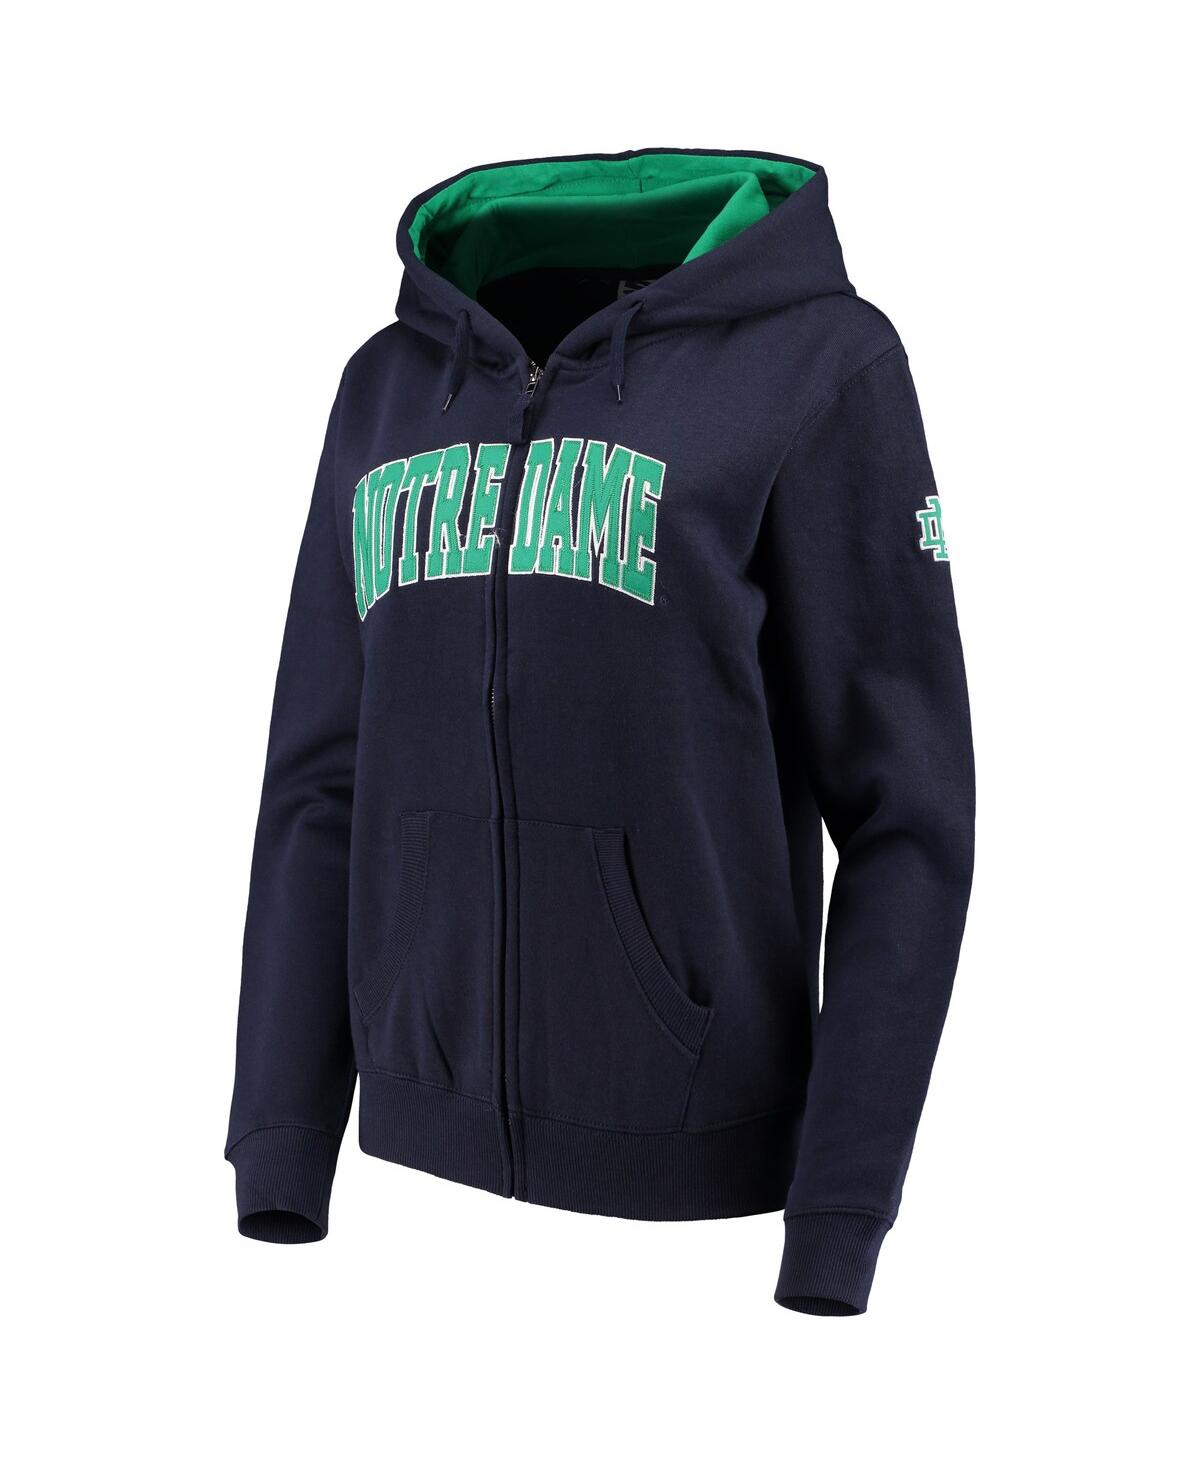 Colosseum Women's  Navy Notre Dame Fighting Irish Arched Name Full-zip Hoodie